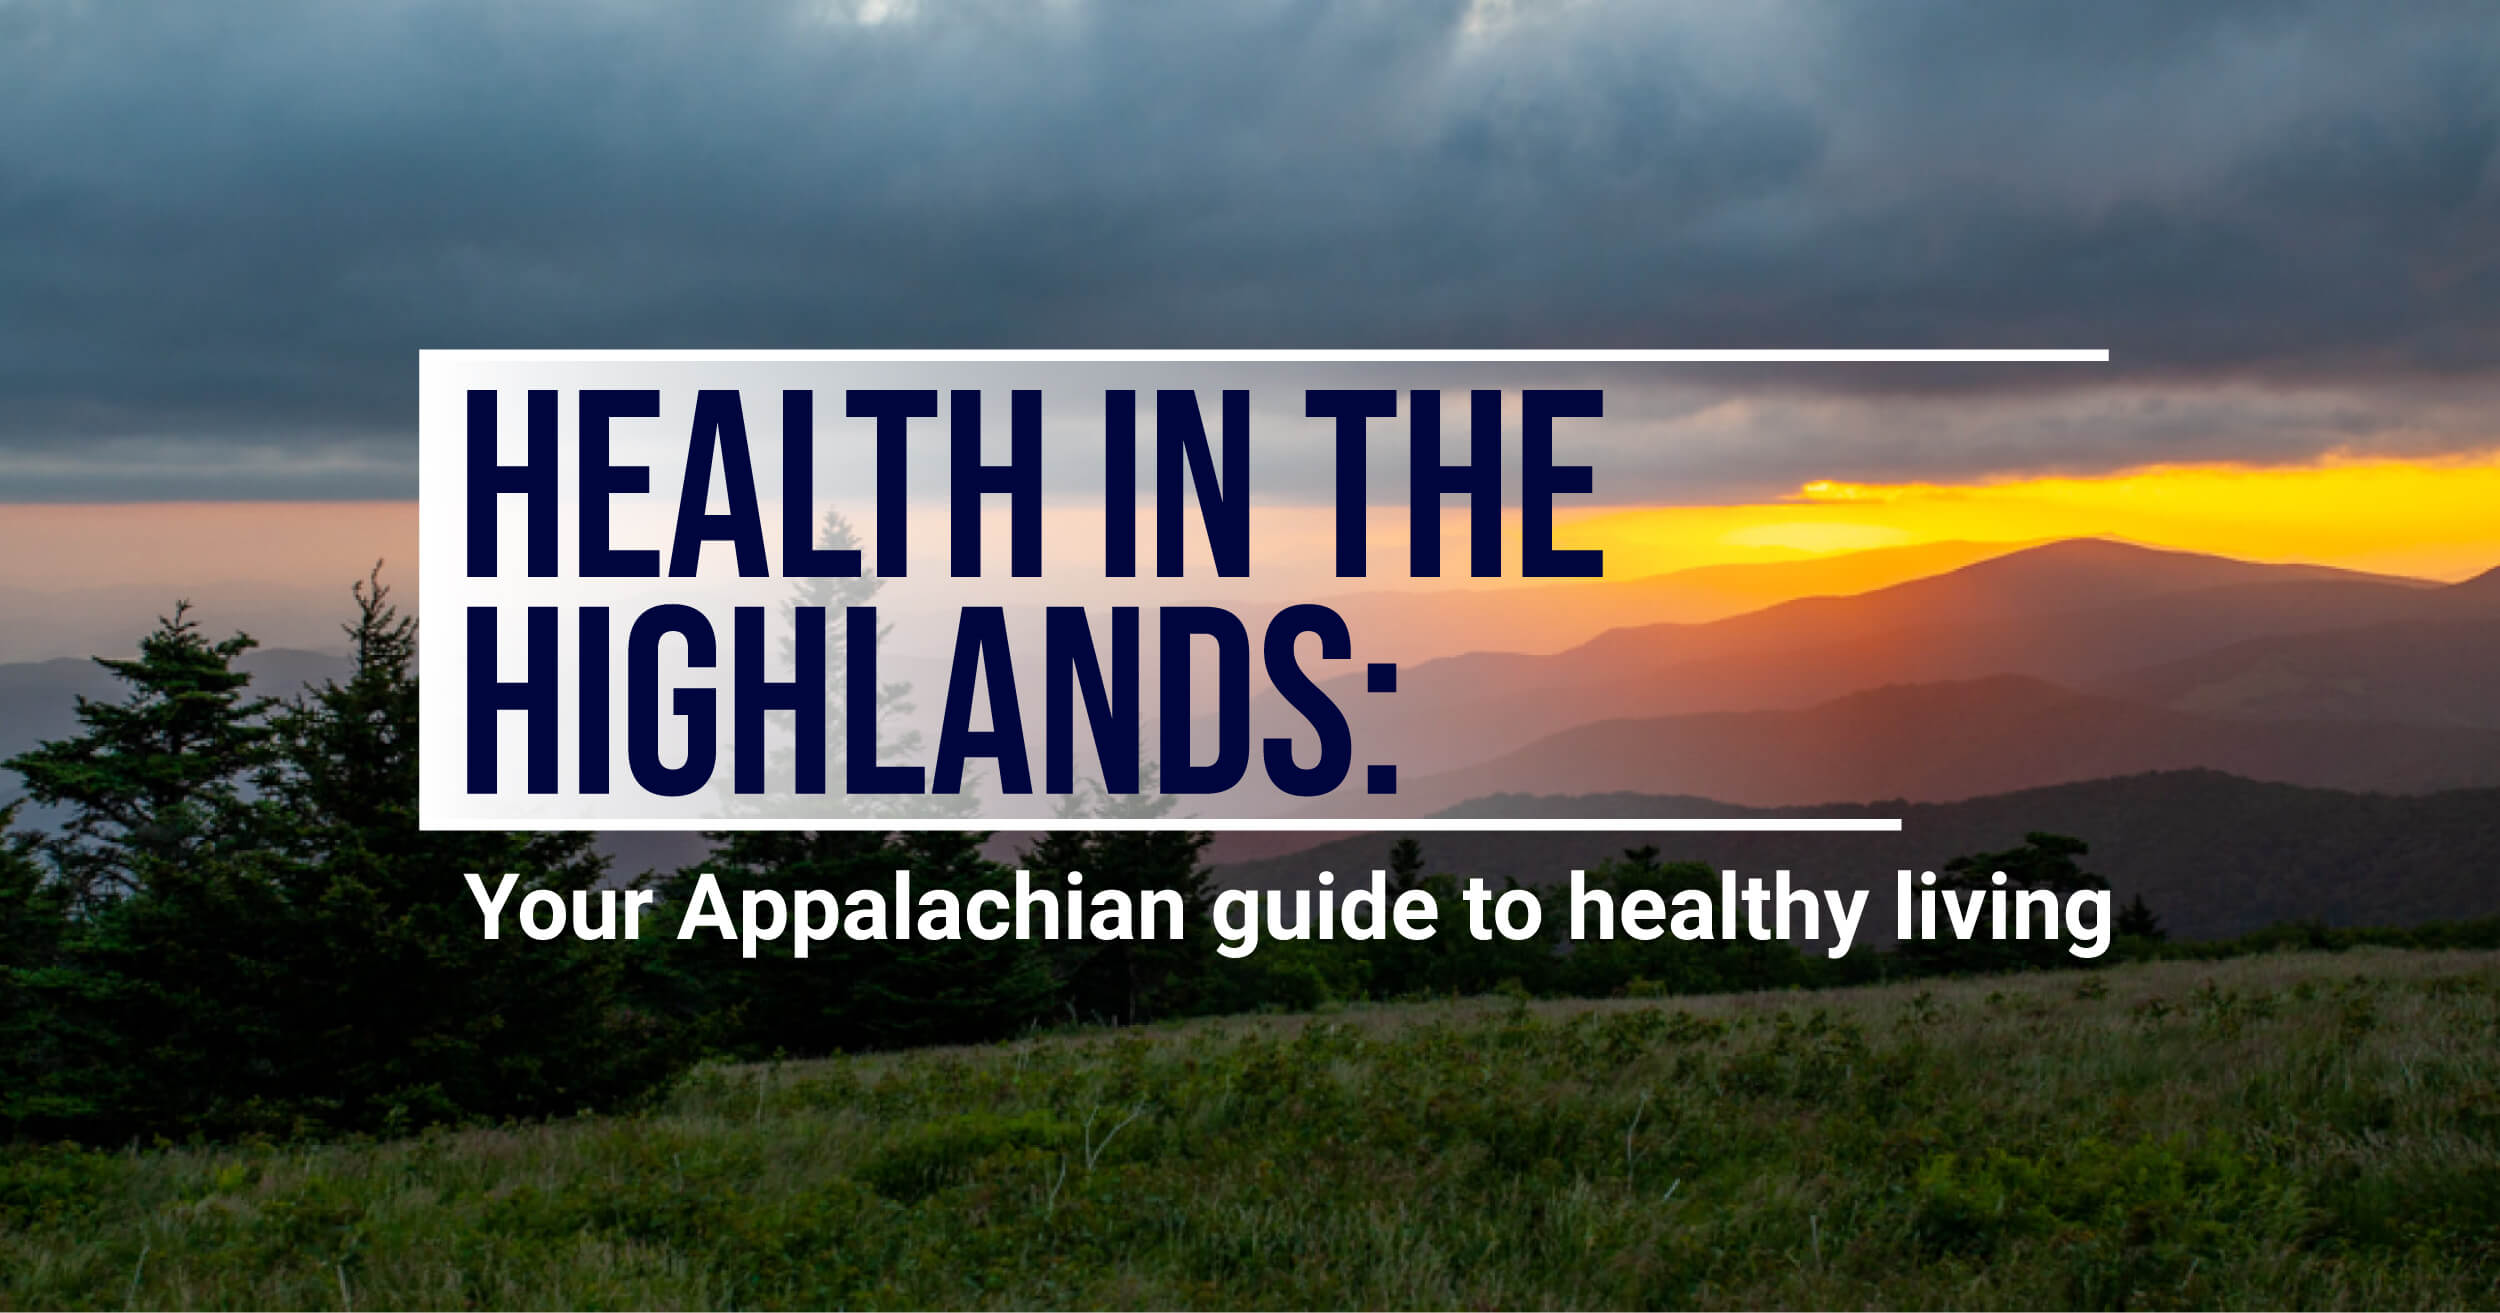 image for Health in the Highlands